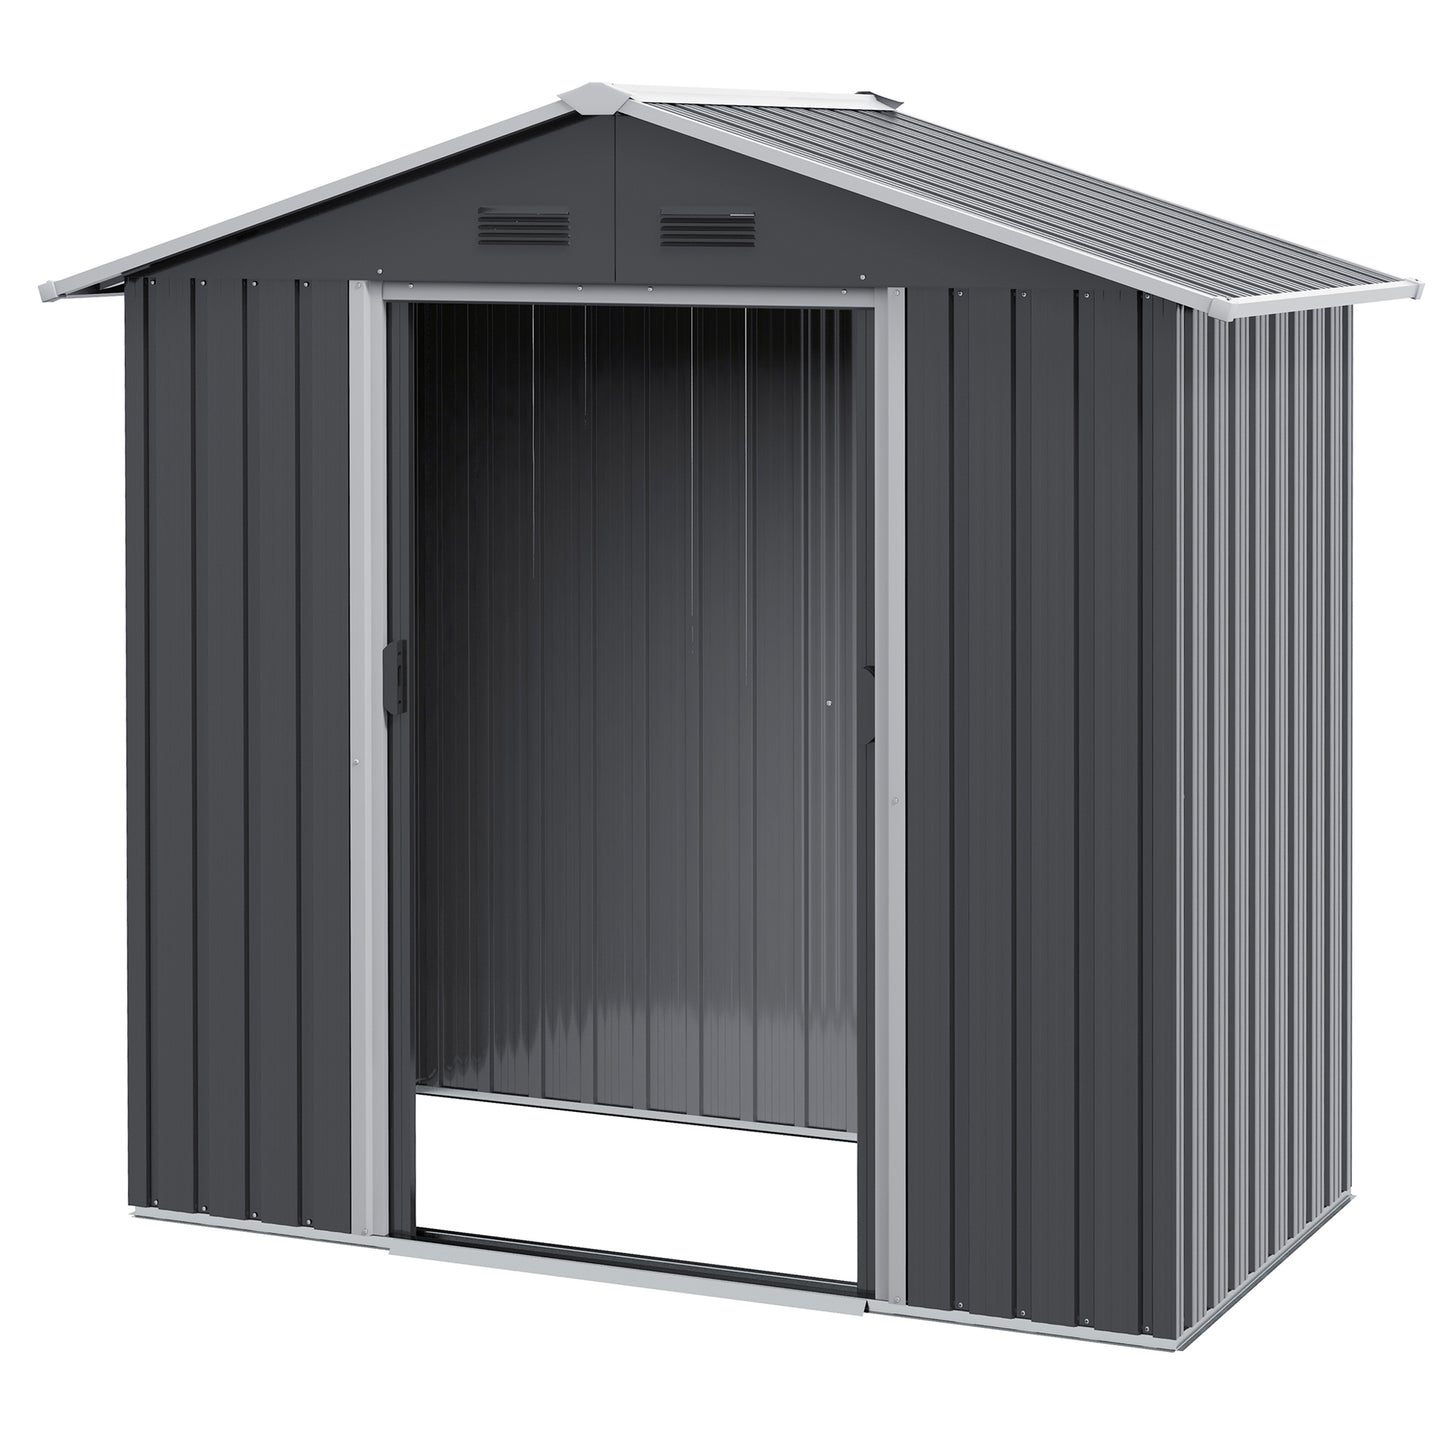 Outsunny 6.5x3.5ft Metal Garden Storage Shed for Outdoor Tool Storage with Double Sliding Doors and 4 Vents Dark Grey